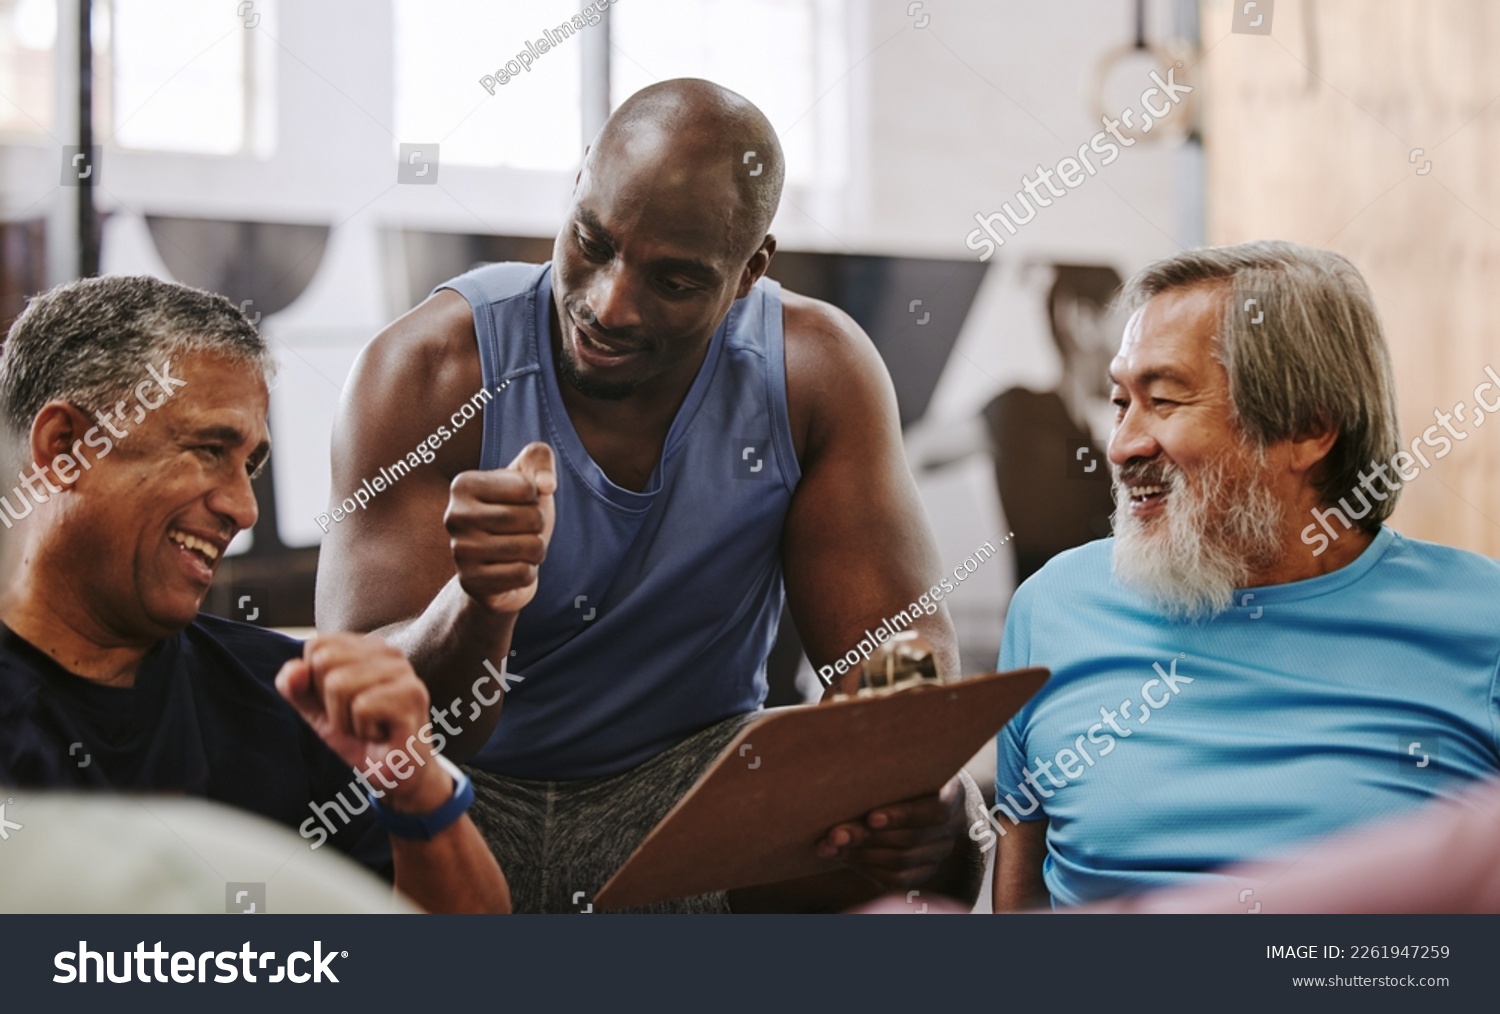 Gym, membership and personal trainer with men for sign up, planning and workout routine on blurred background. Health, checklist and coach with old people on floor for training, goals and motivation #2261947259